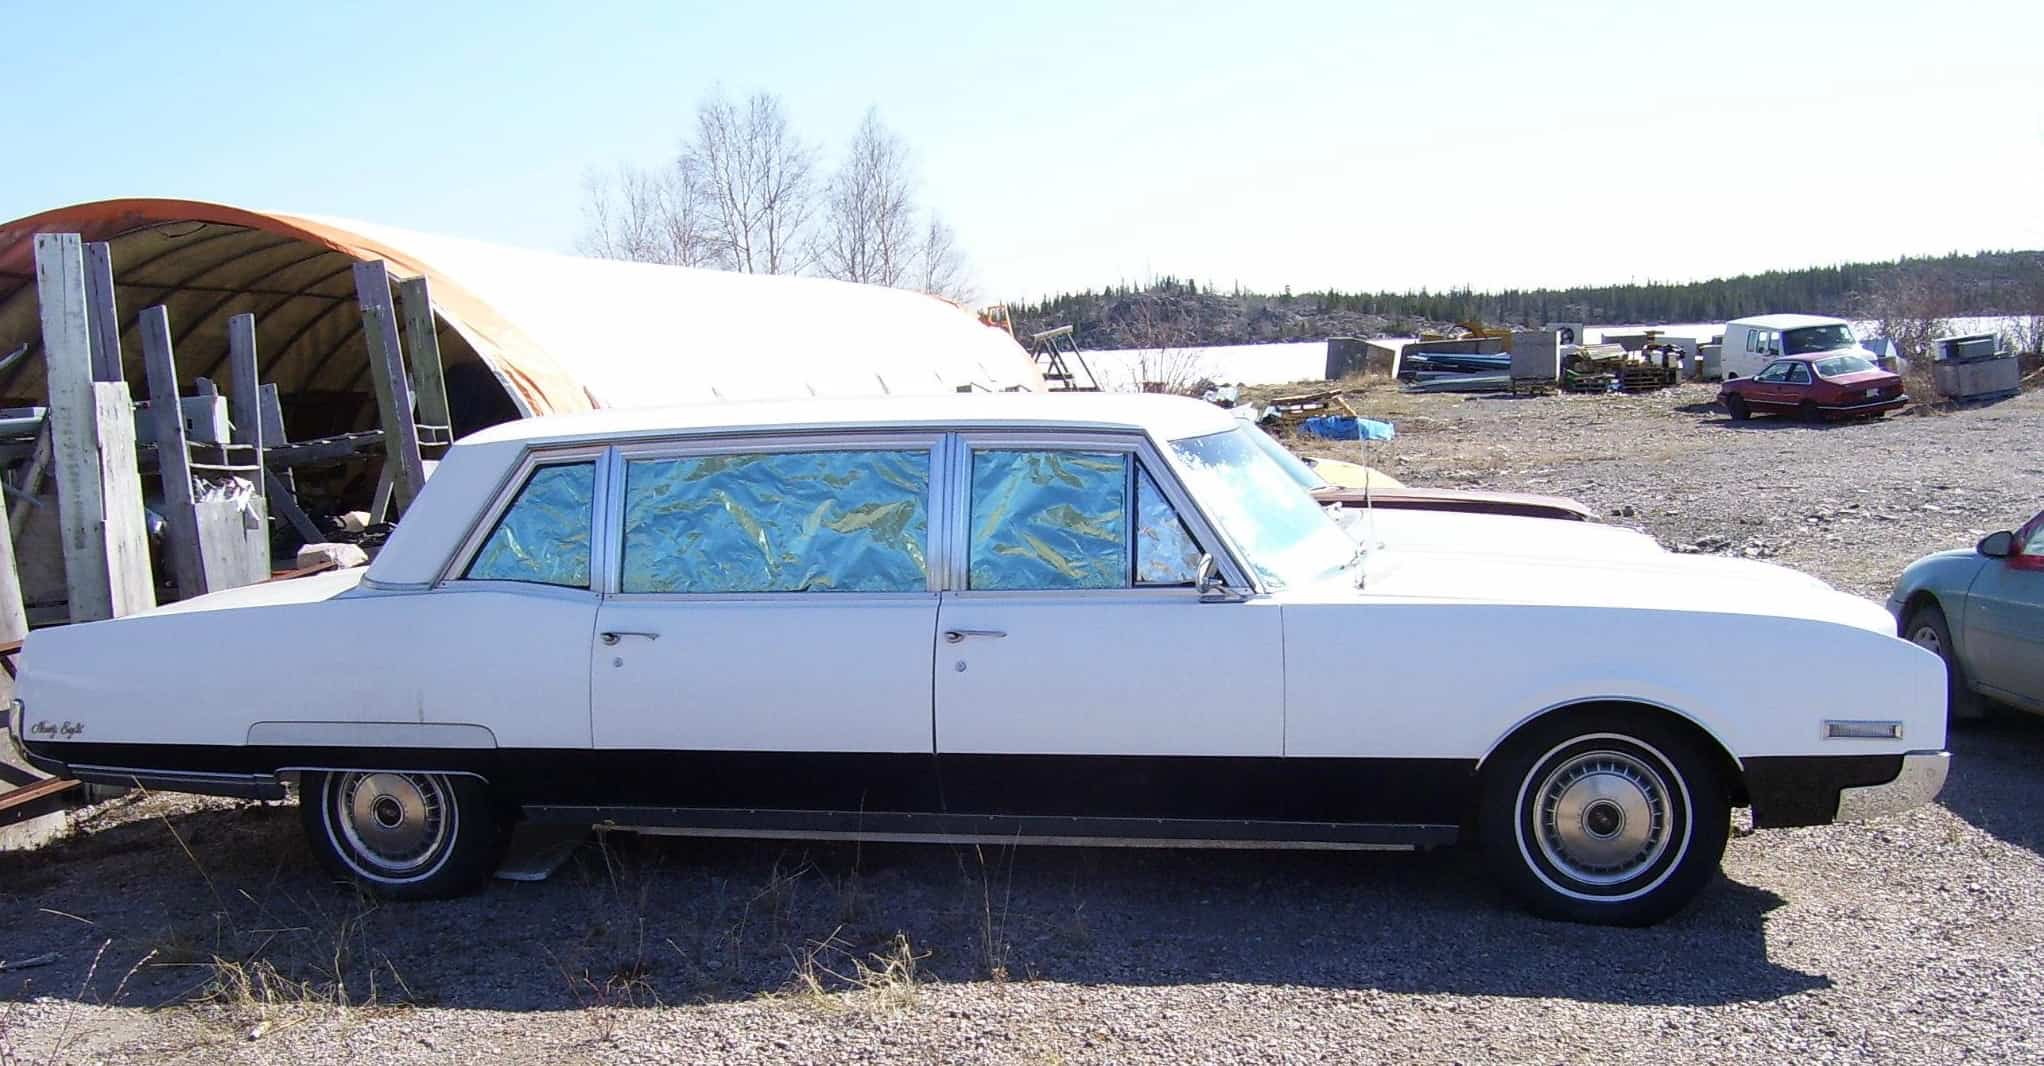 1967 Oldsmobile limousine comes with matching hearse, Pick of the Day is a 2-for-1 deal, ClassicCars.com Journal